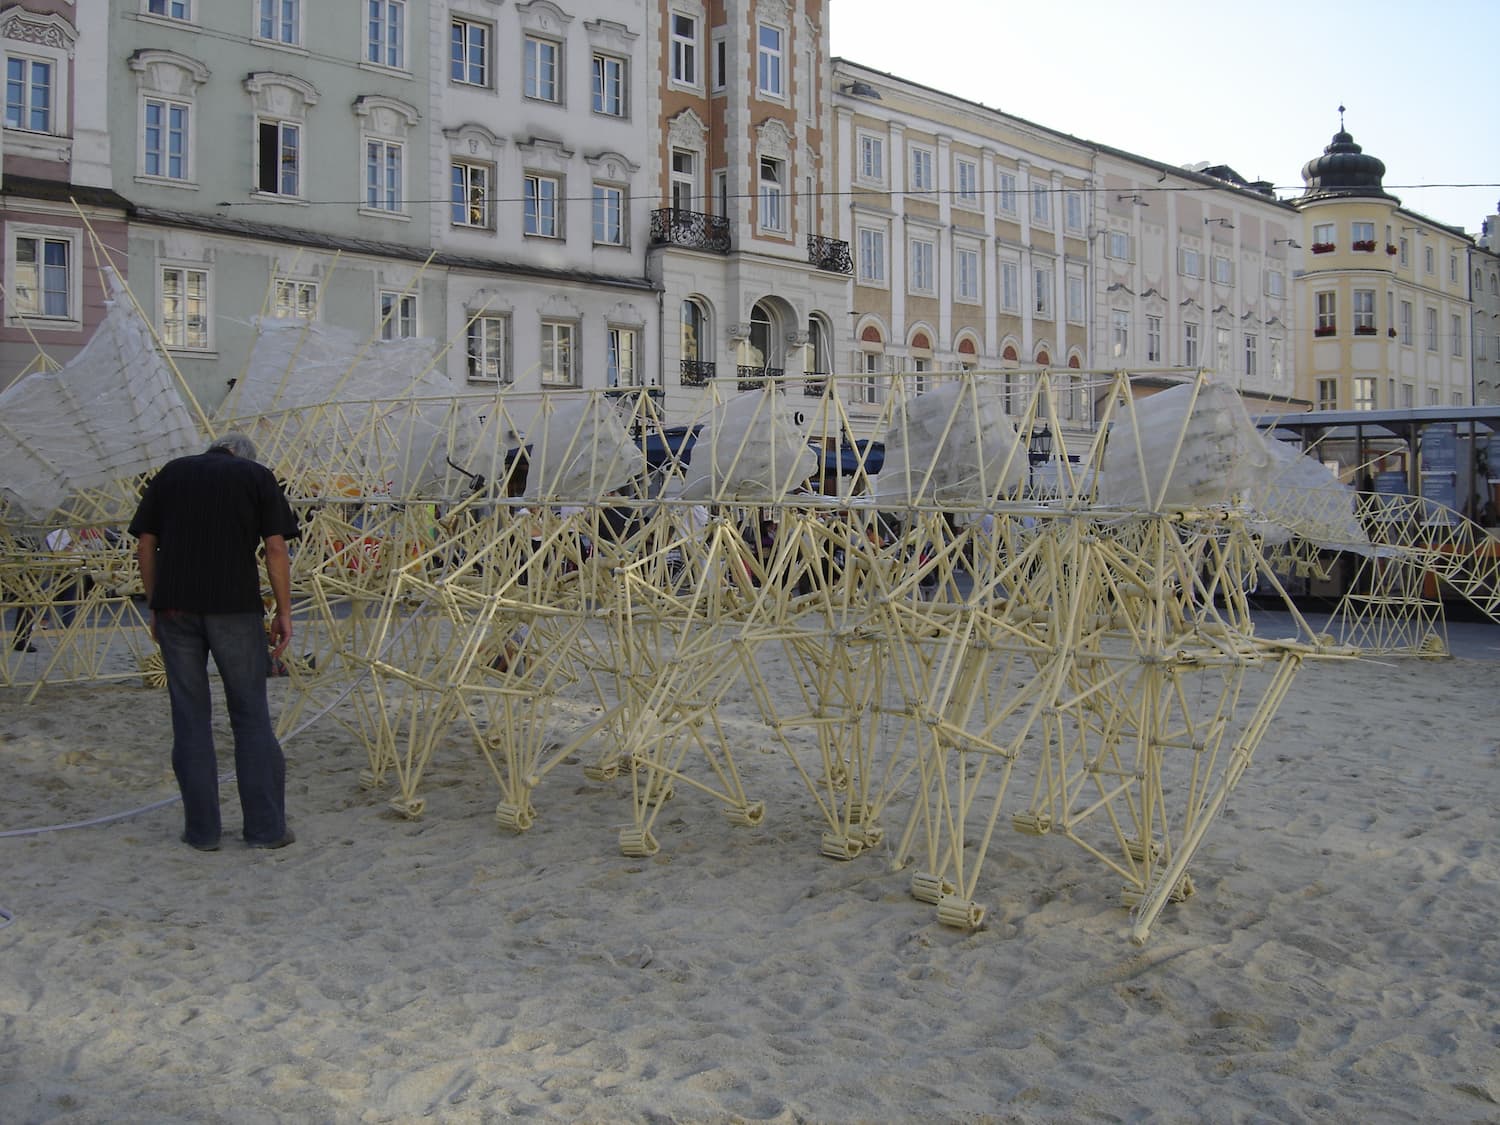 Jansen's work exhibited in Linz during Ars Electronica, in 2005. Photo: Eloquence, Public domain, via Wikimedia Commons.